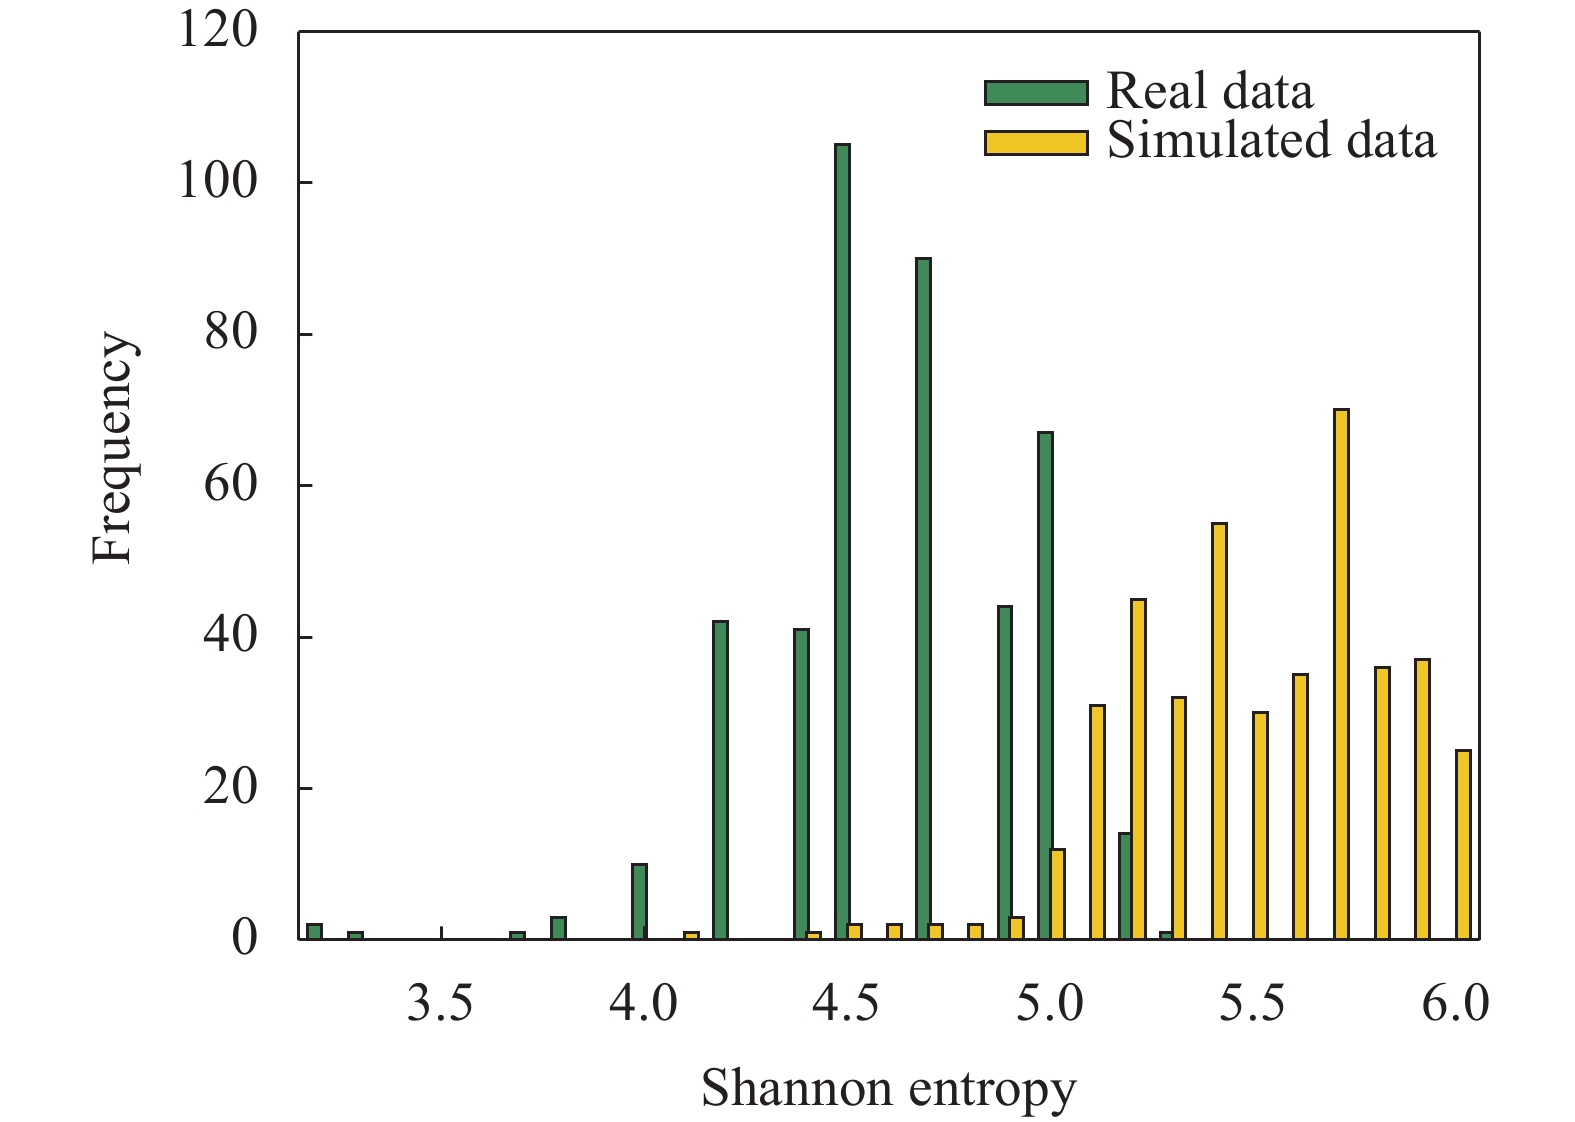 Comparison of Shannon entropy between real and simulated dataset